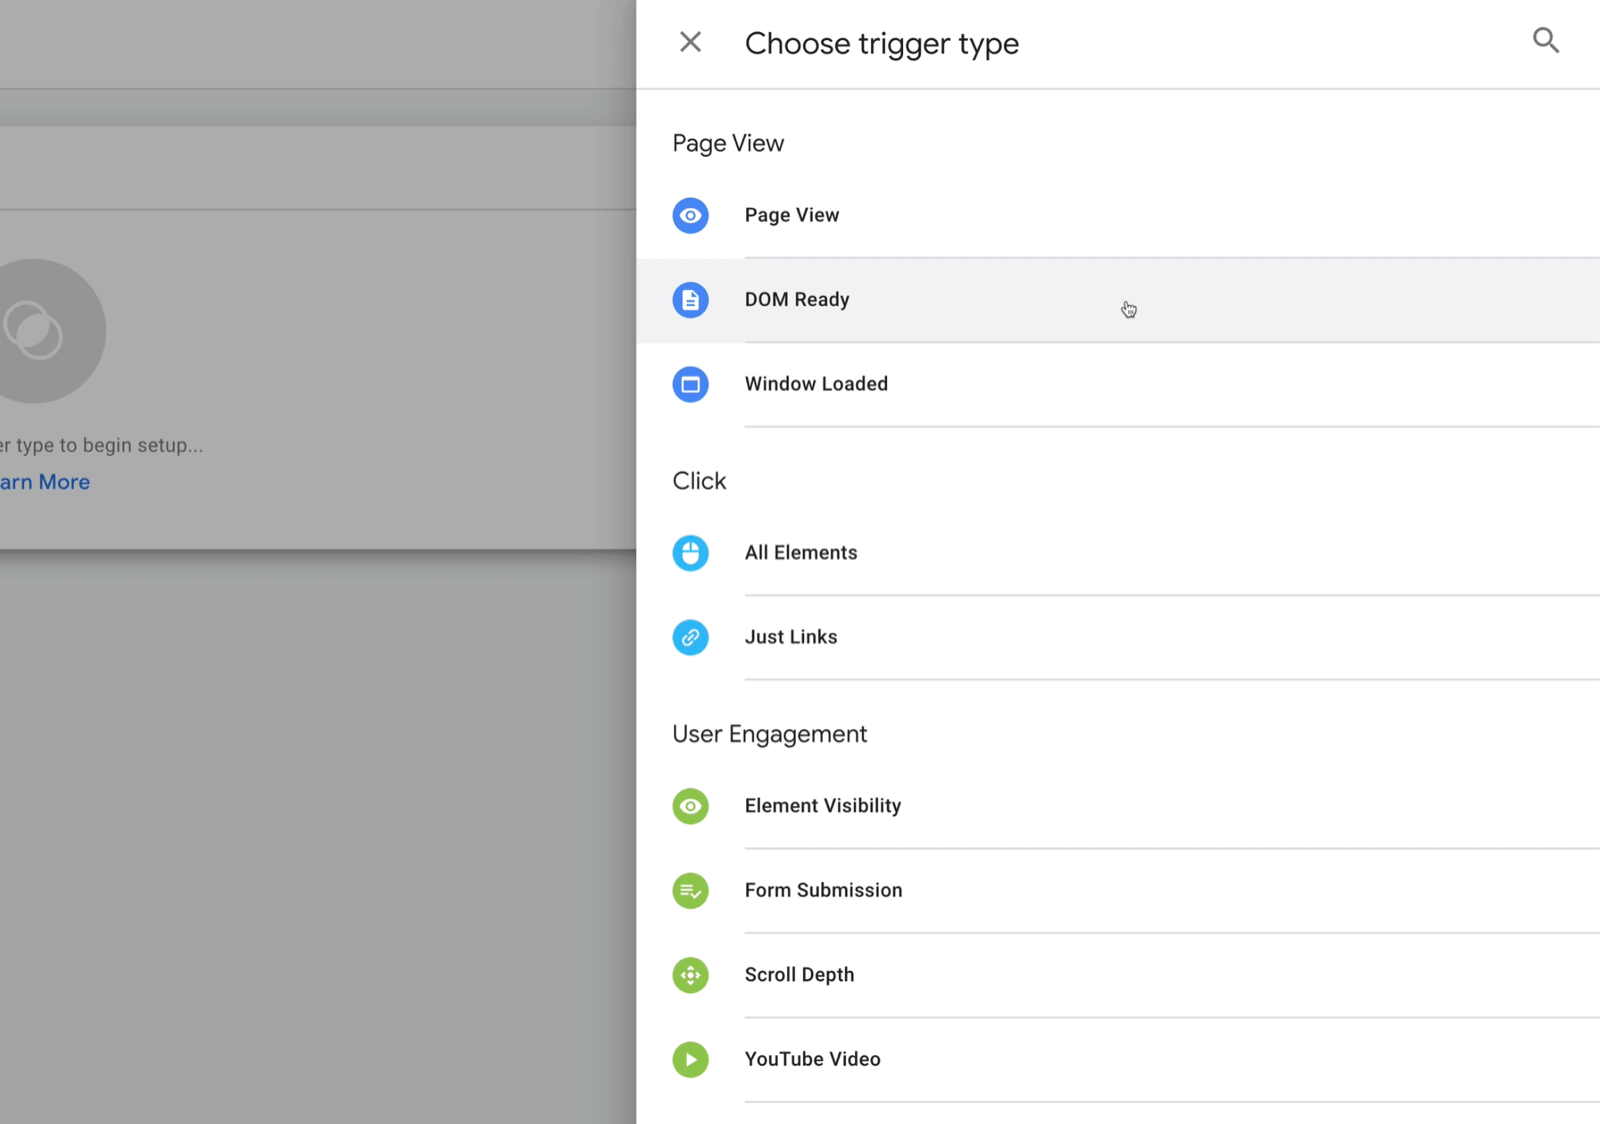 new google tag manager tag with choose a trigger type menu options, including page view, dom ready, all elements, form submission, and scroll depth, among others